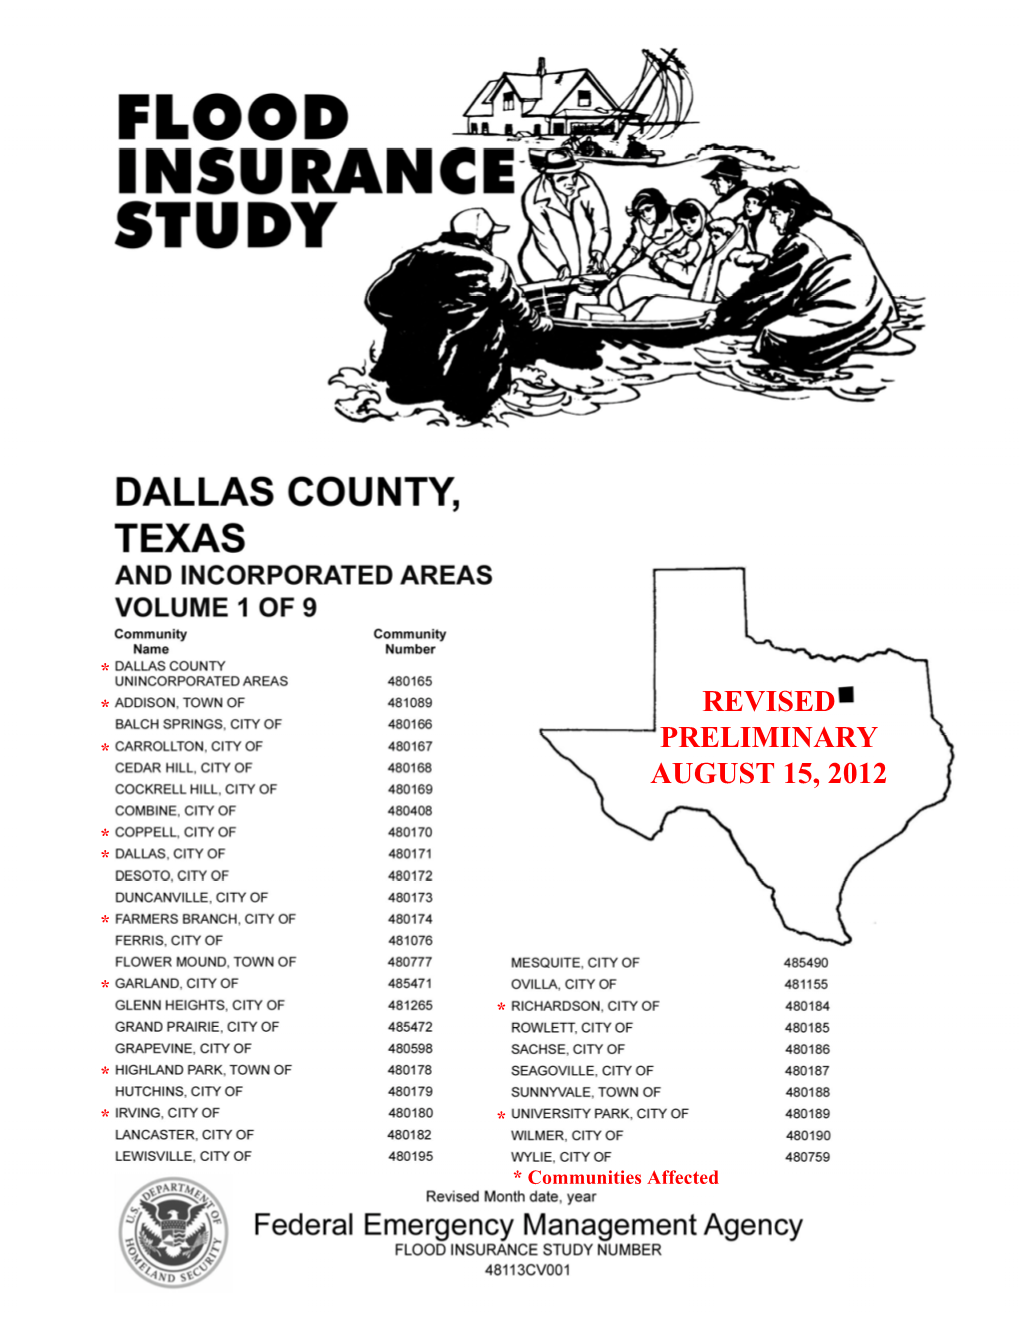 Flood Insurance Study for Dallas County